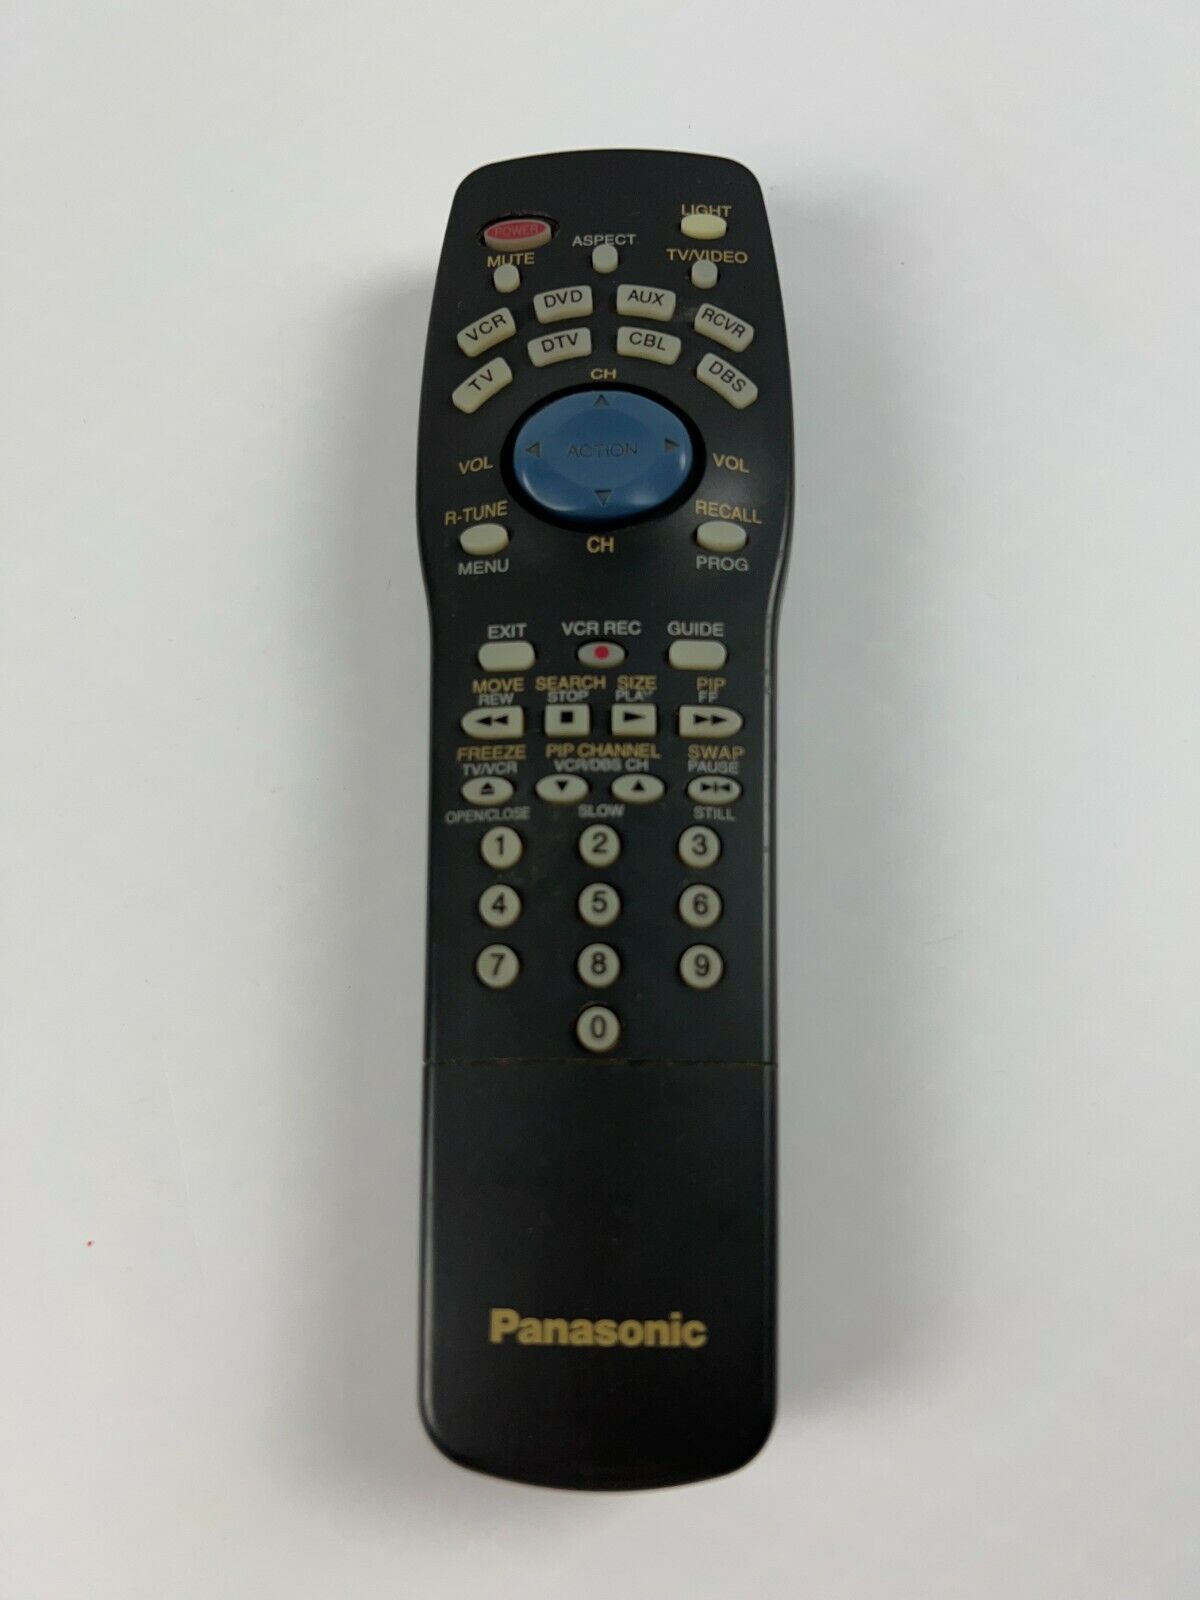 Panasonic Universal Remote Control EUR511163 Tested Working